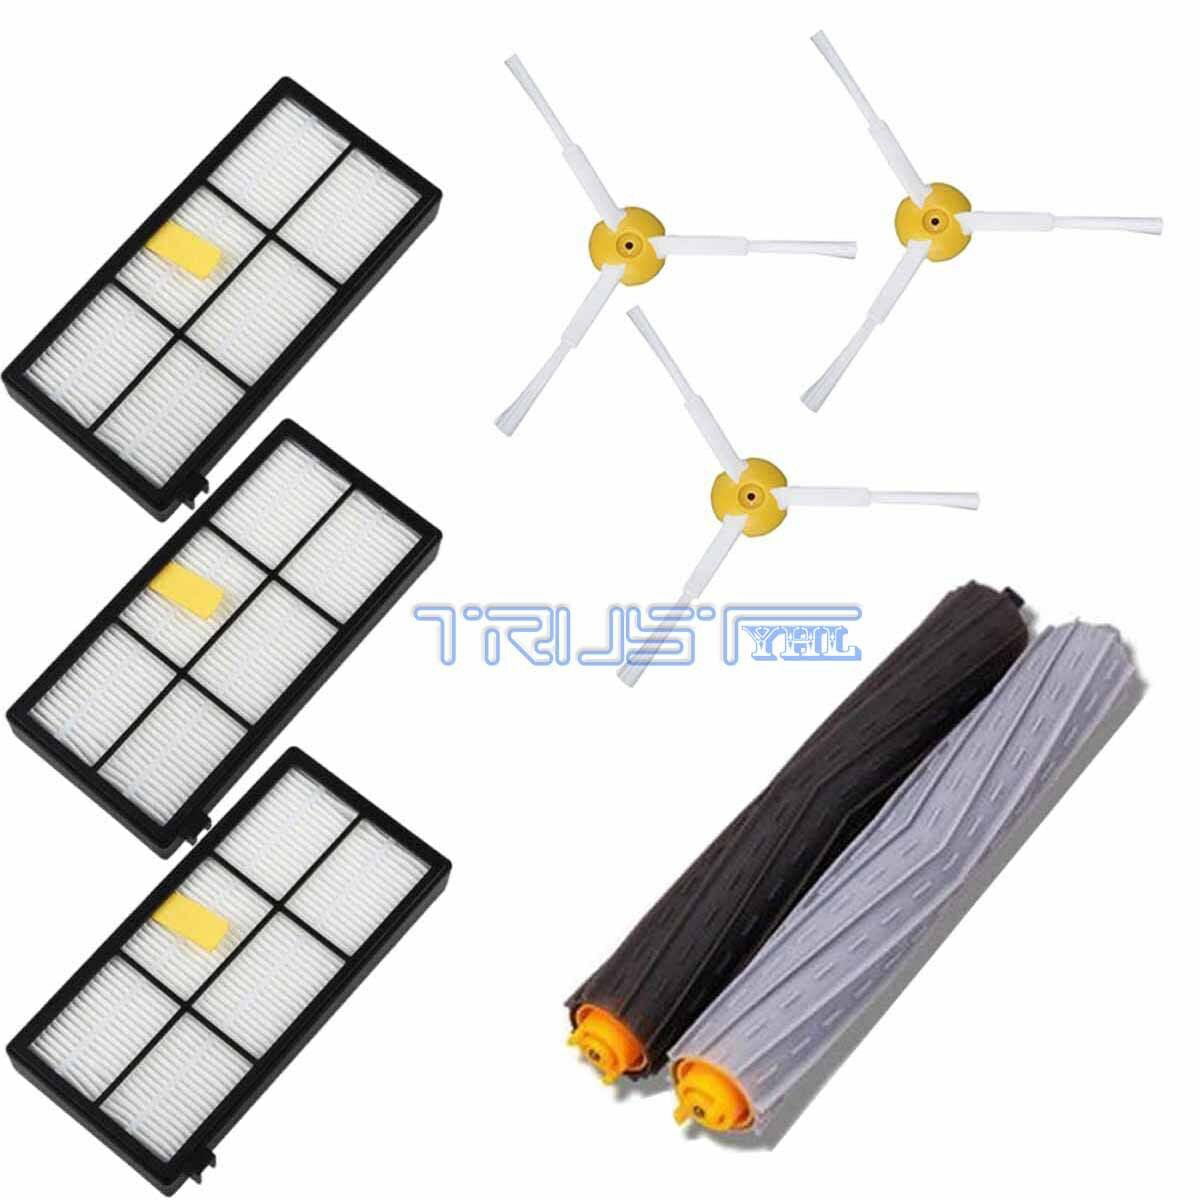 Replacement Side Brush Filter Extractor Kit For irobot Roomba 800 870 880 980 US 